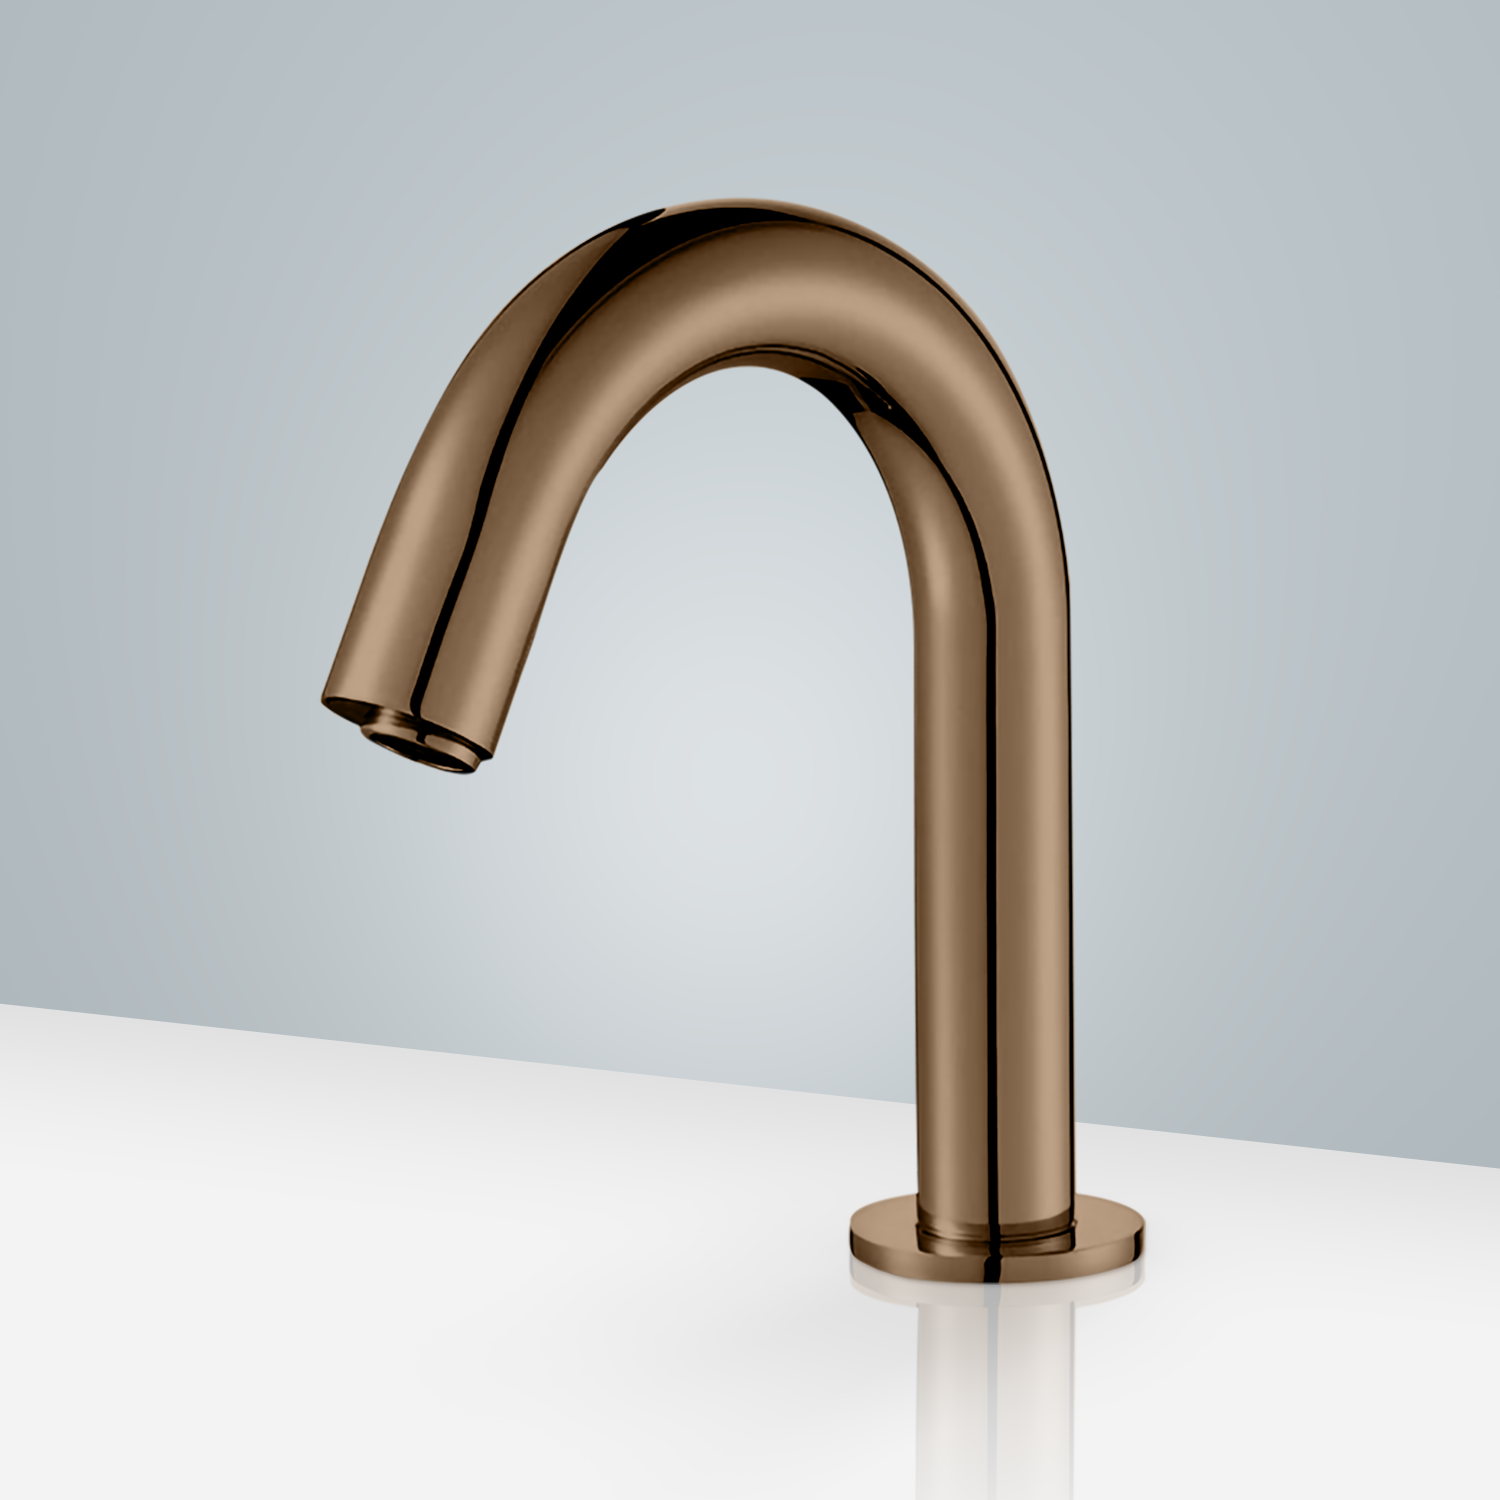 Fontana Brio Commercial Oil Rubbed Bronze Touchless Volume Sensor Hands Free Faucet